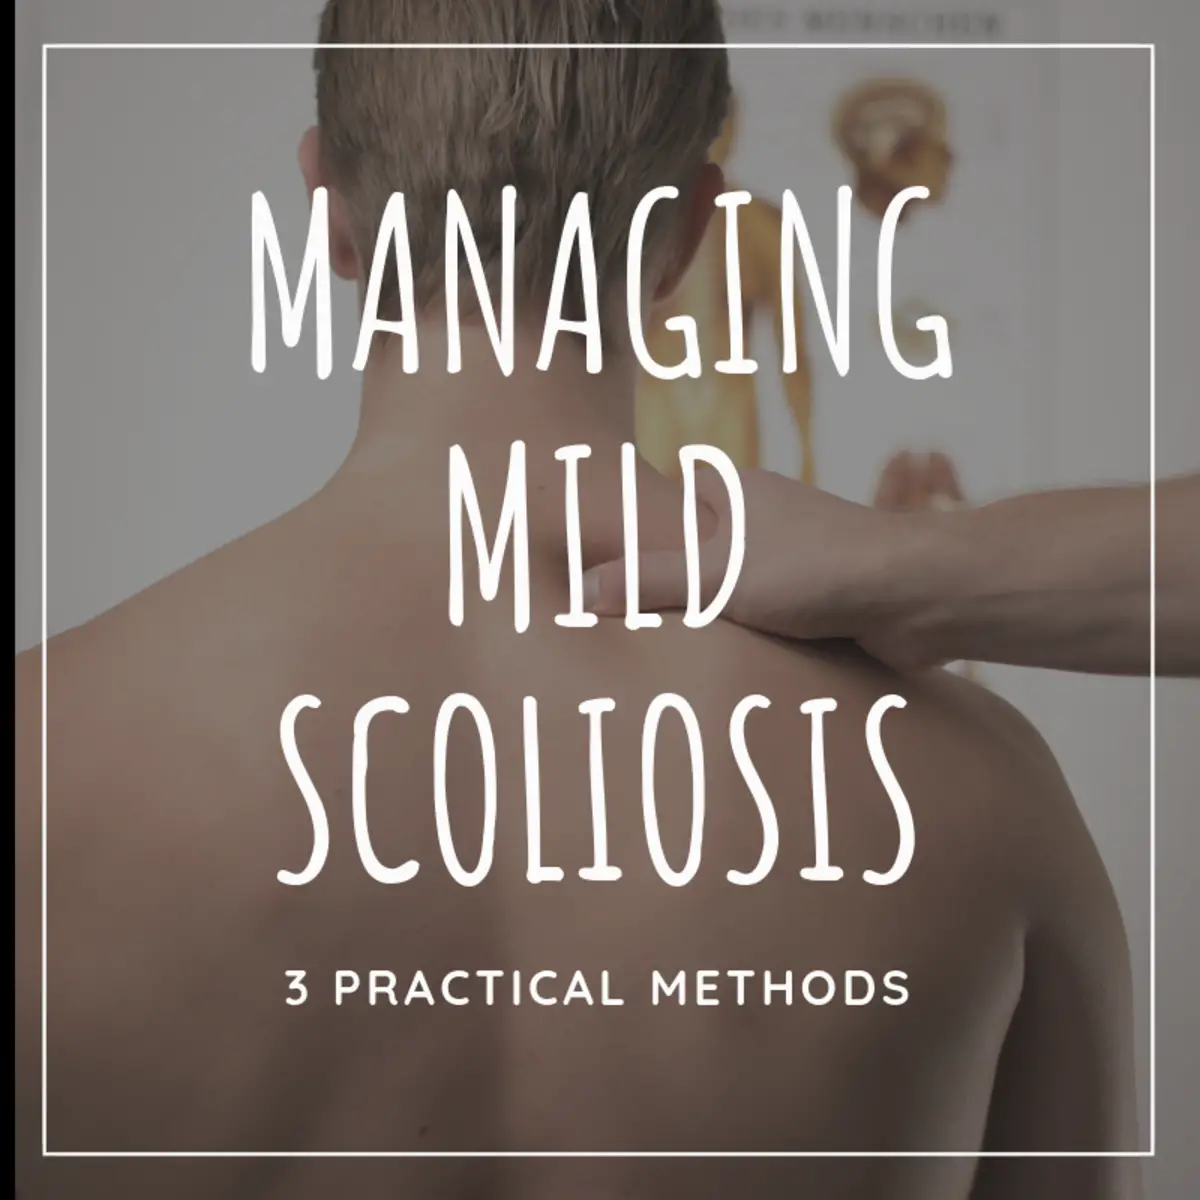 How to Treat Mild Scoliosis: 3 Simple and Effective ...